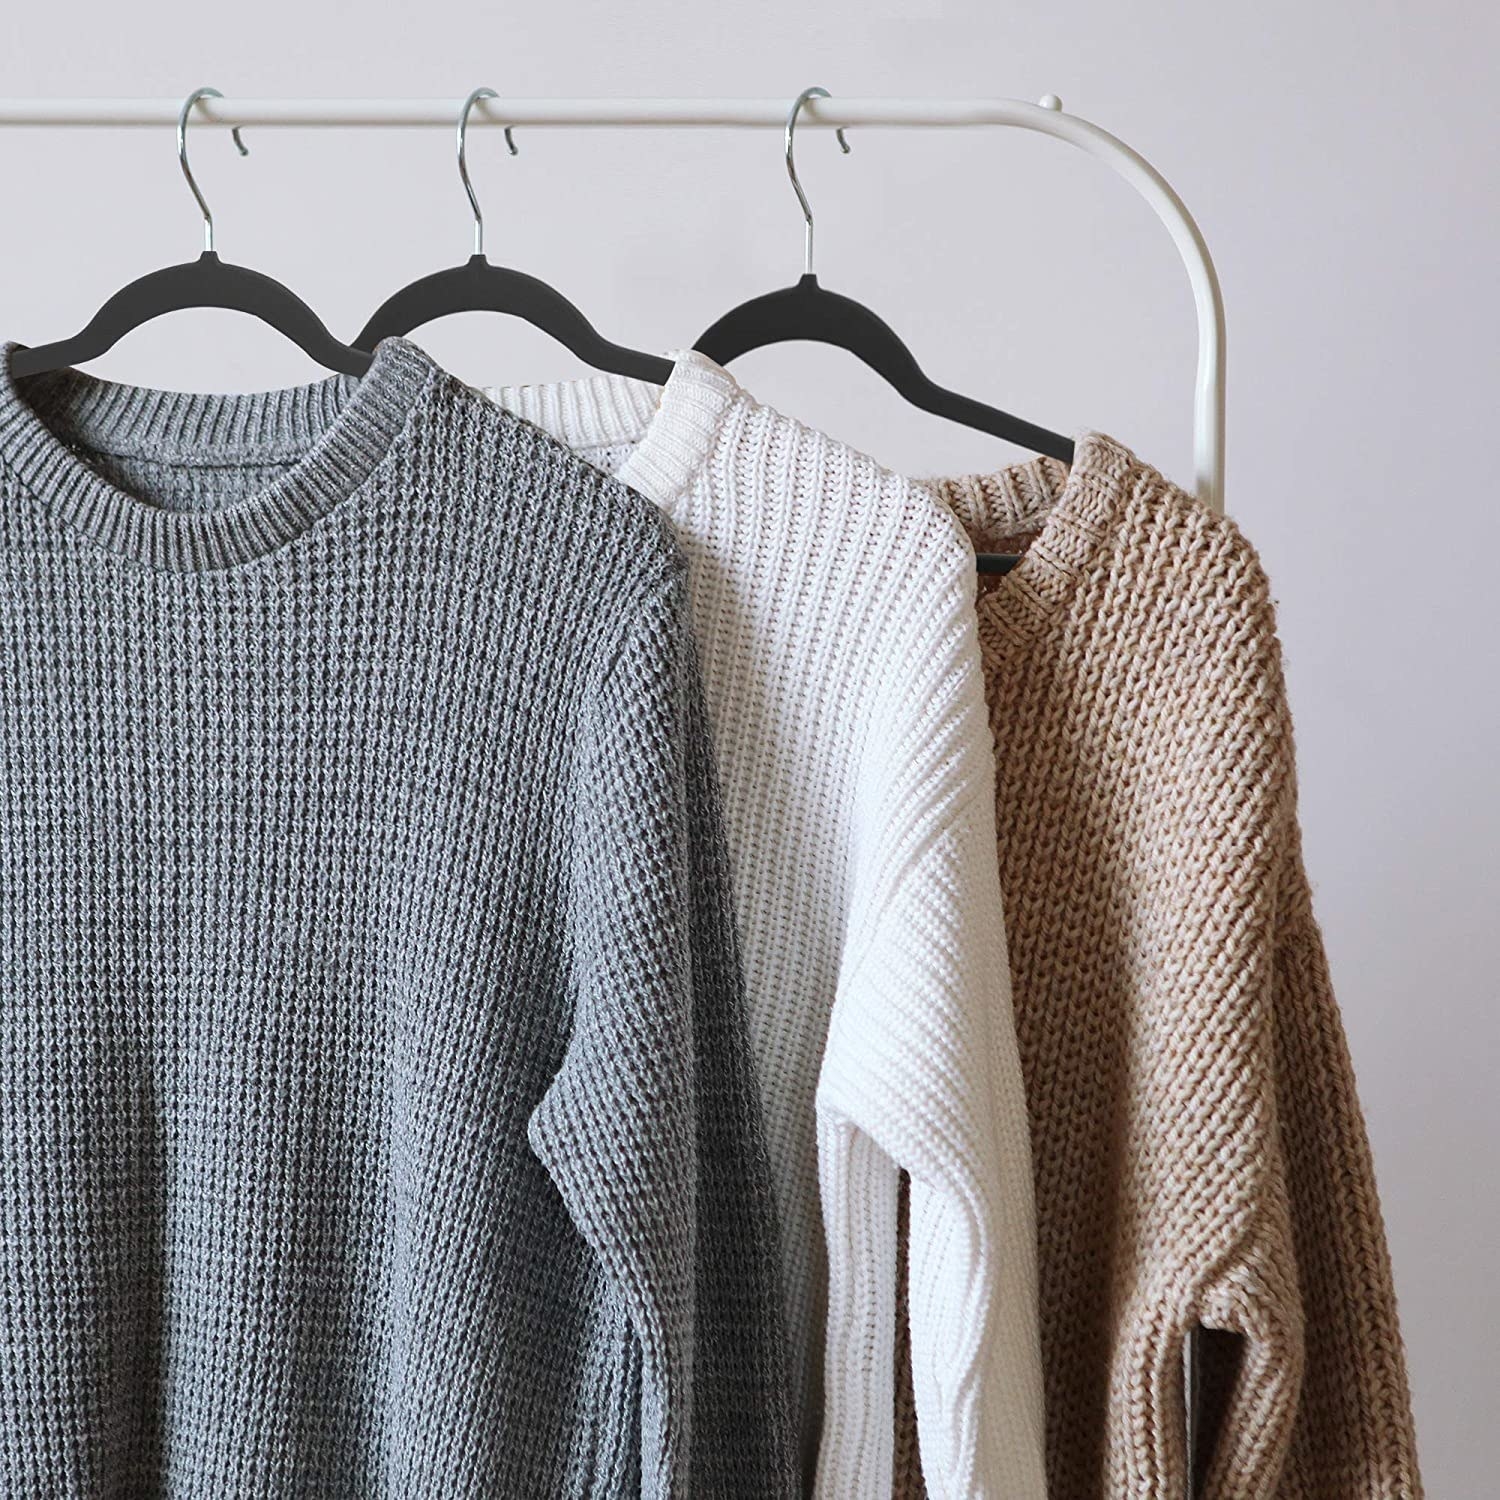 Sweaters hanging on a clothing rack with the velvet hangers